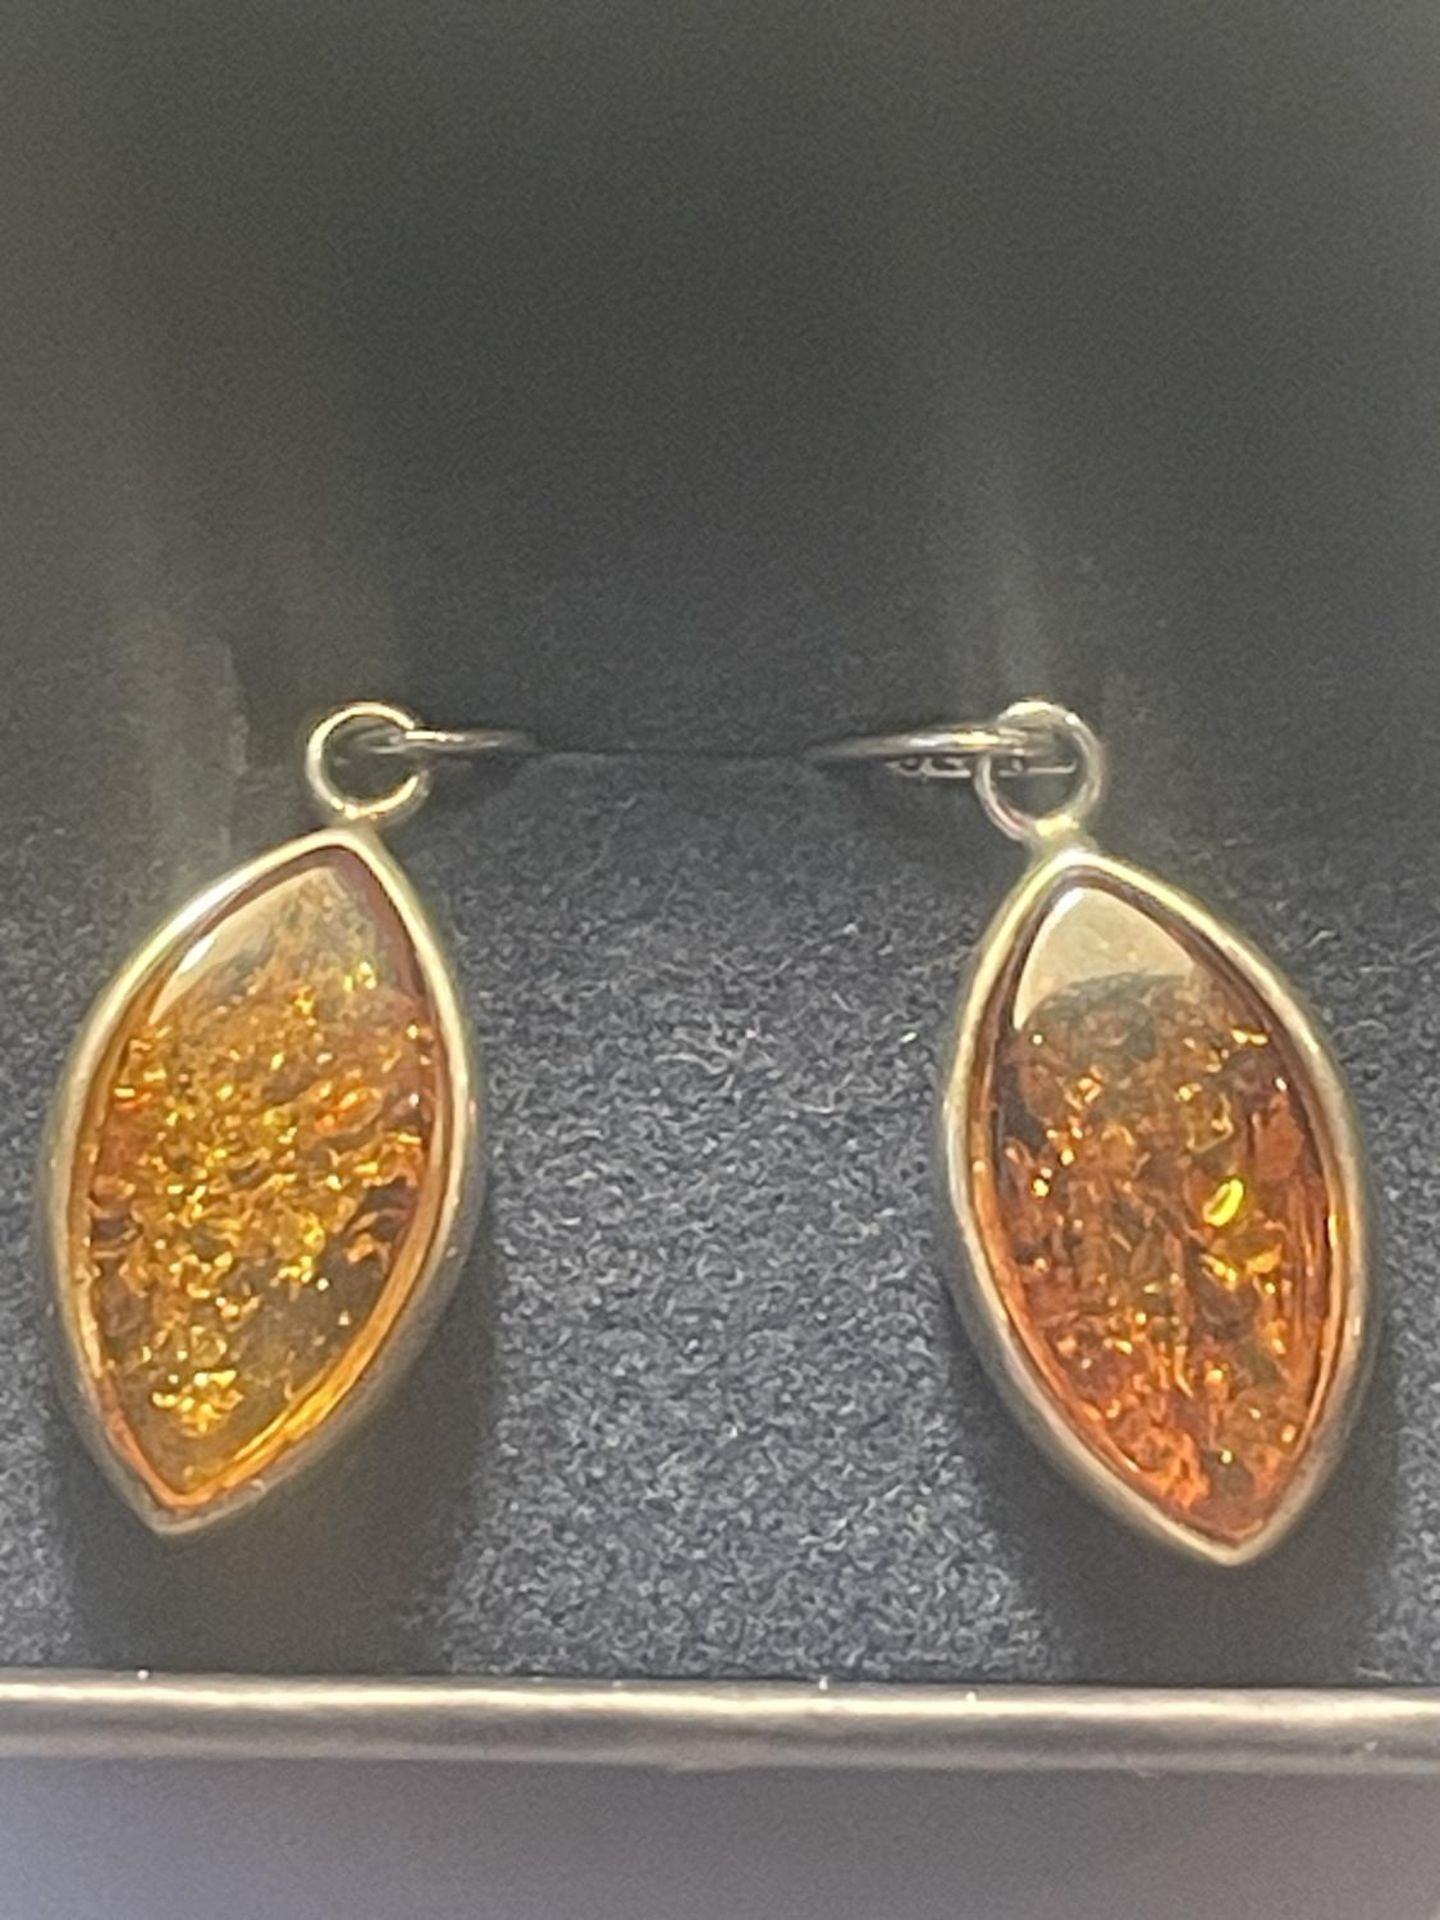 A PAIR OF SILVER AND AMBER DROP EARRINGS IN A PRESENTATION BOX - Image 2 of 3